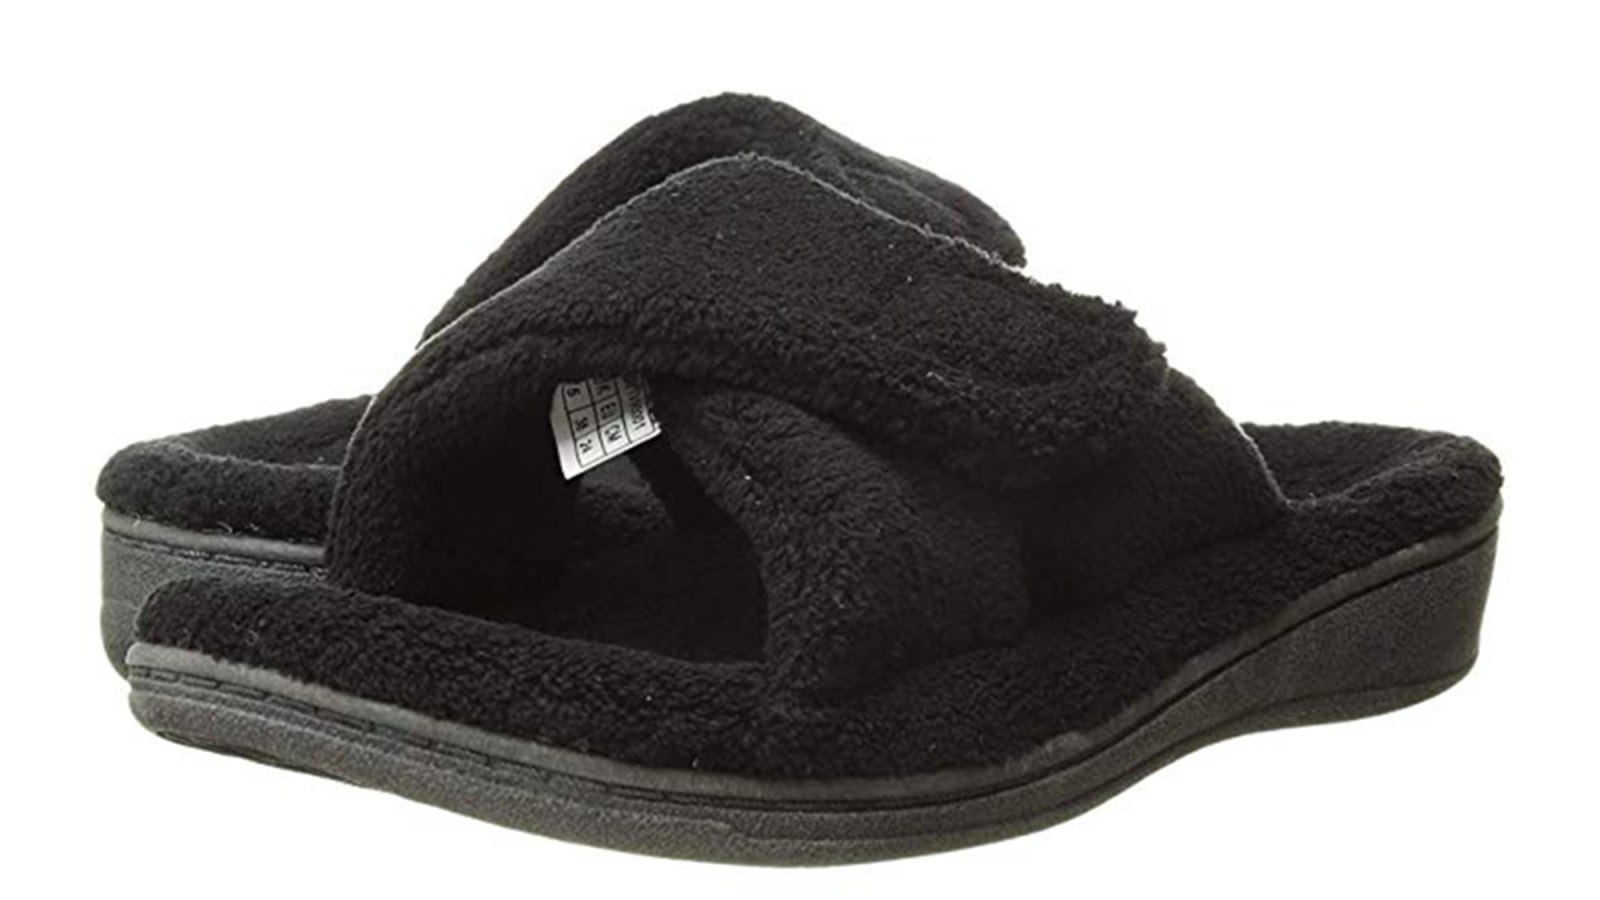 slipper-hed-zappos